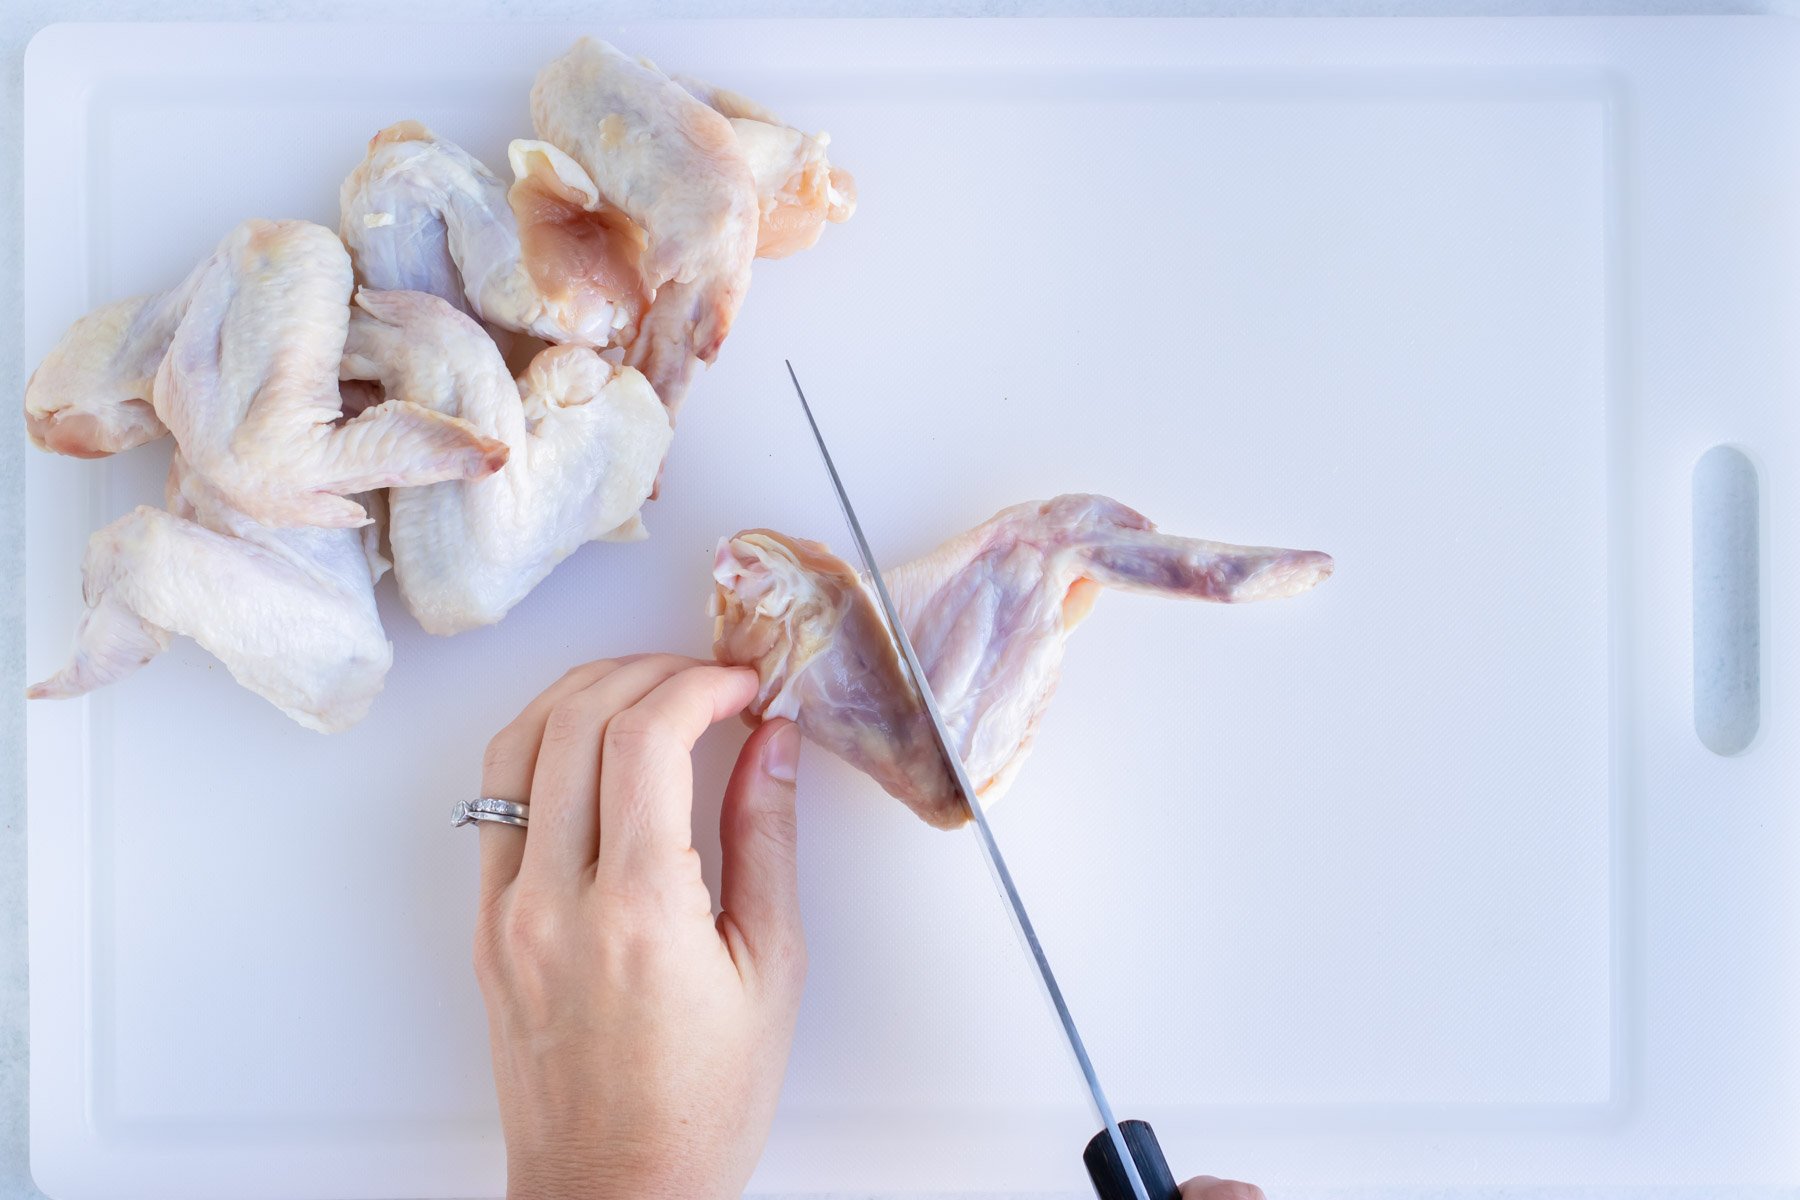 A chicken wing is cut with a knife.